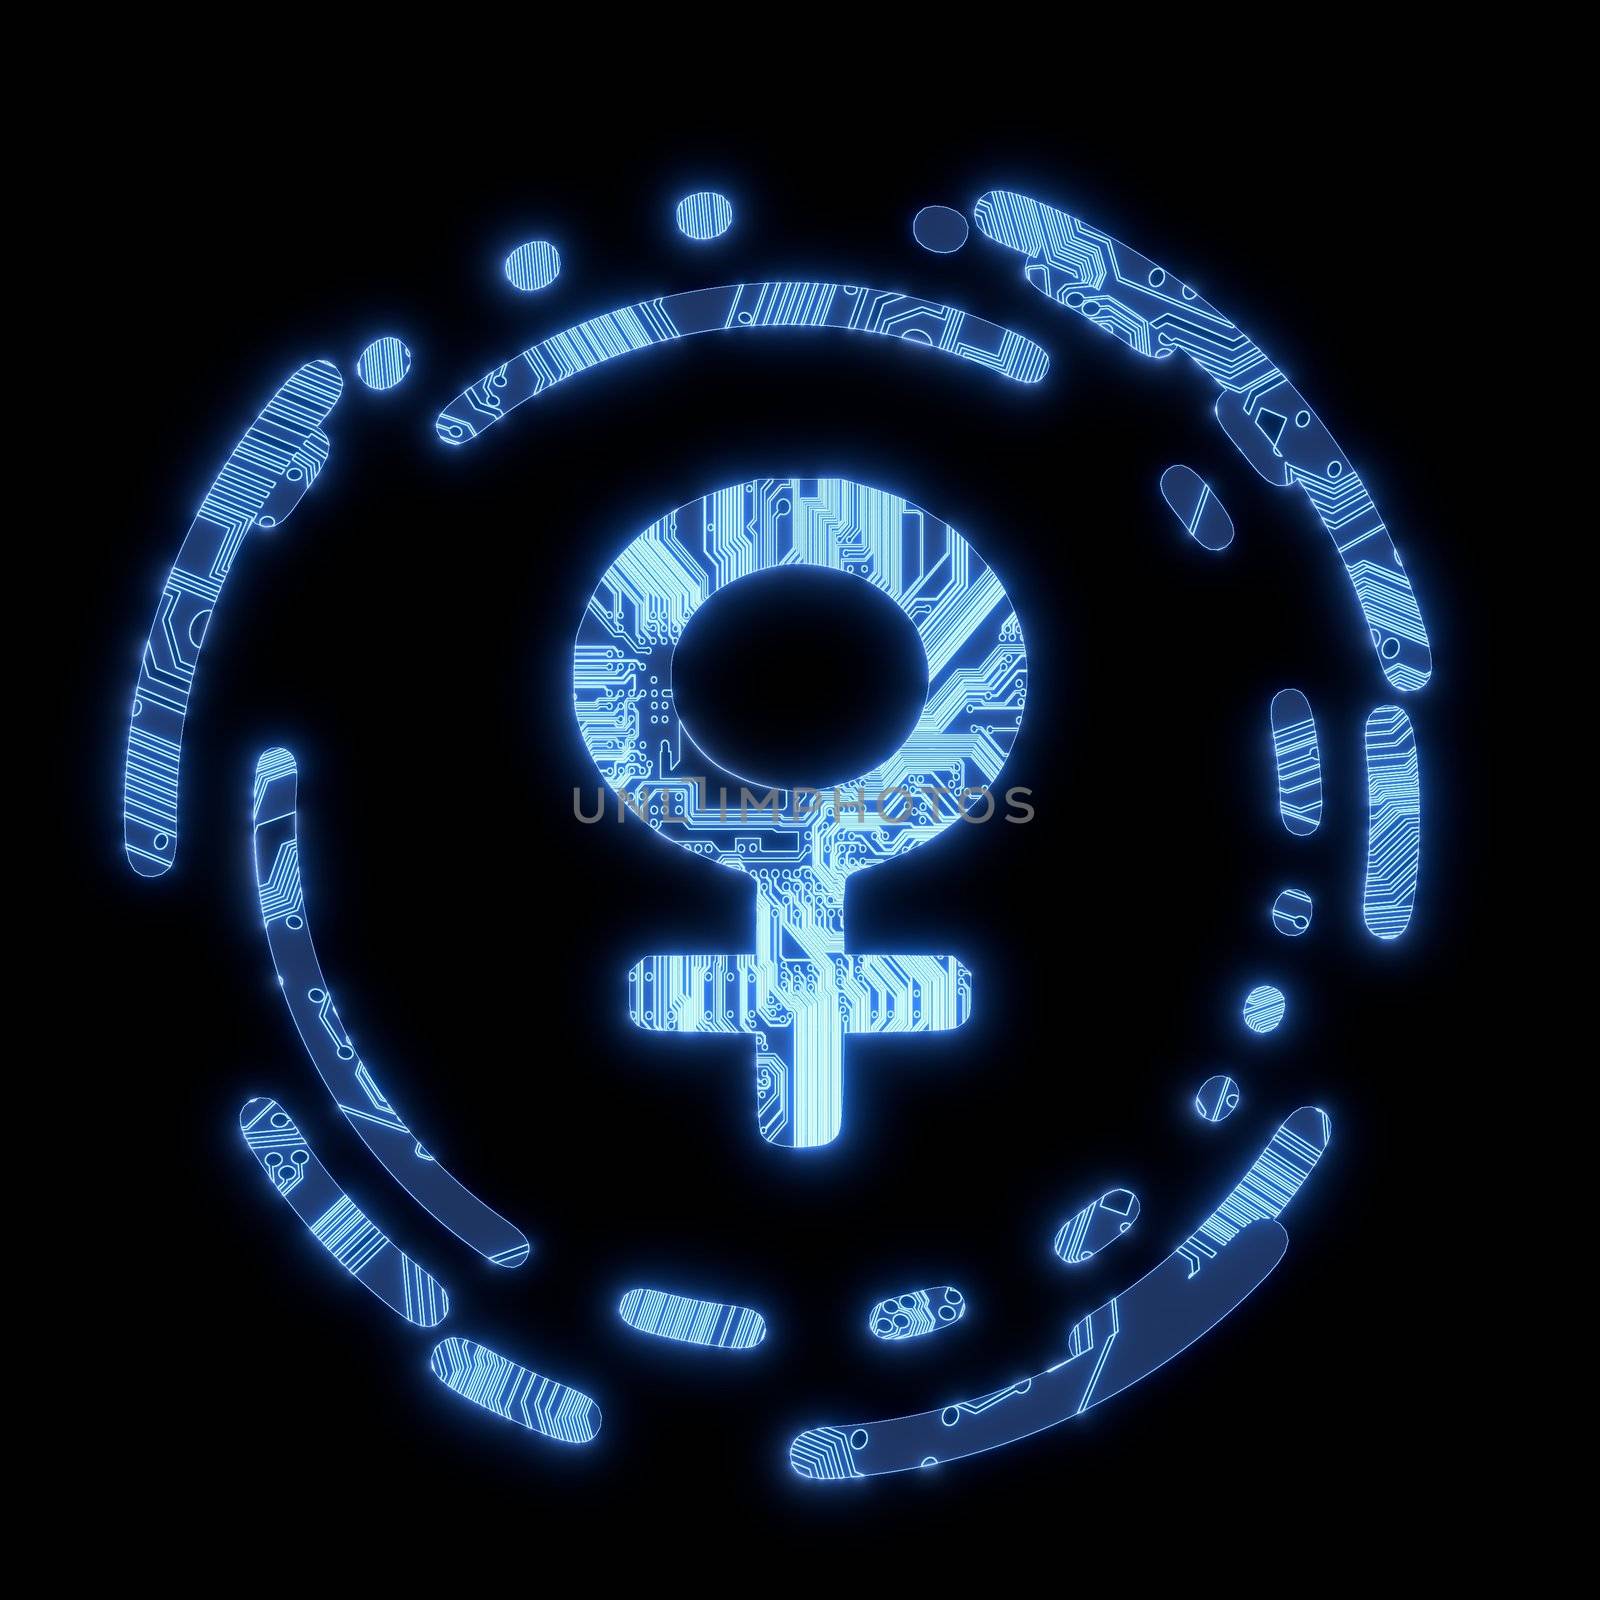 3D Graphic Steel blue electric flare woman symbol in a dark background on a computer chip